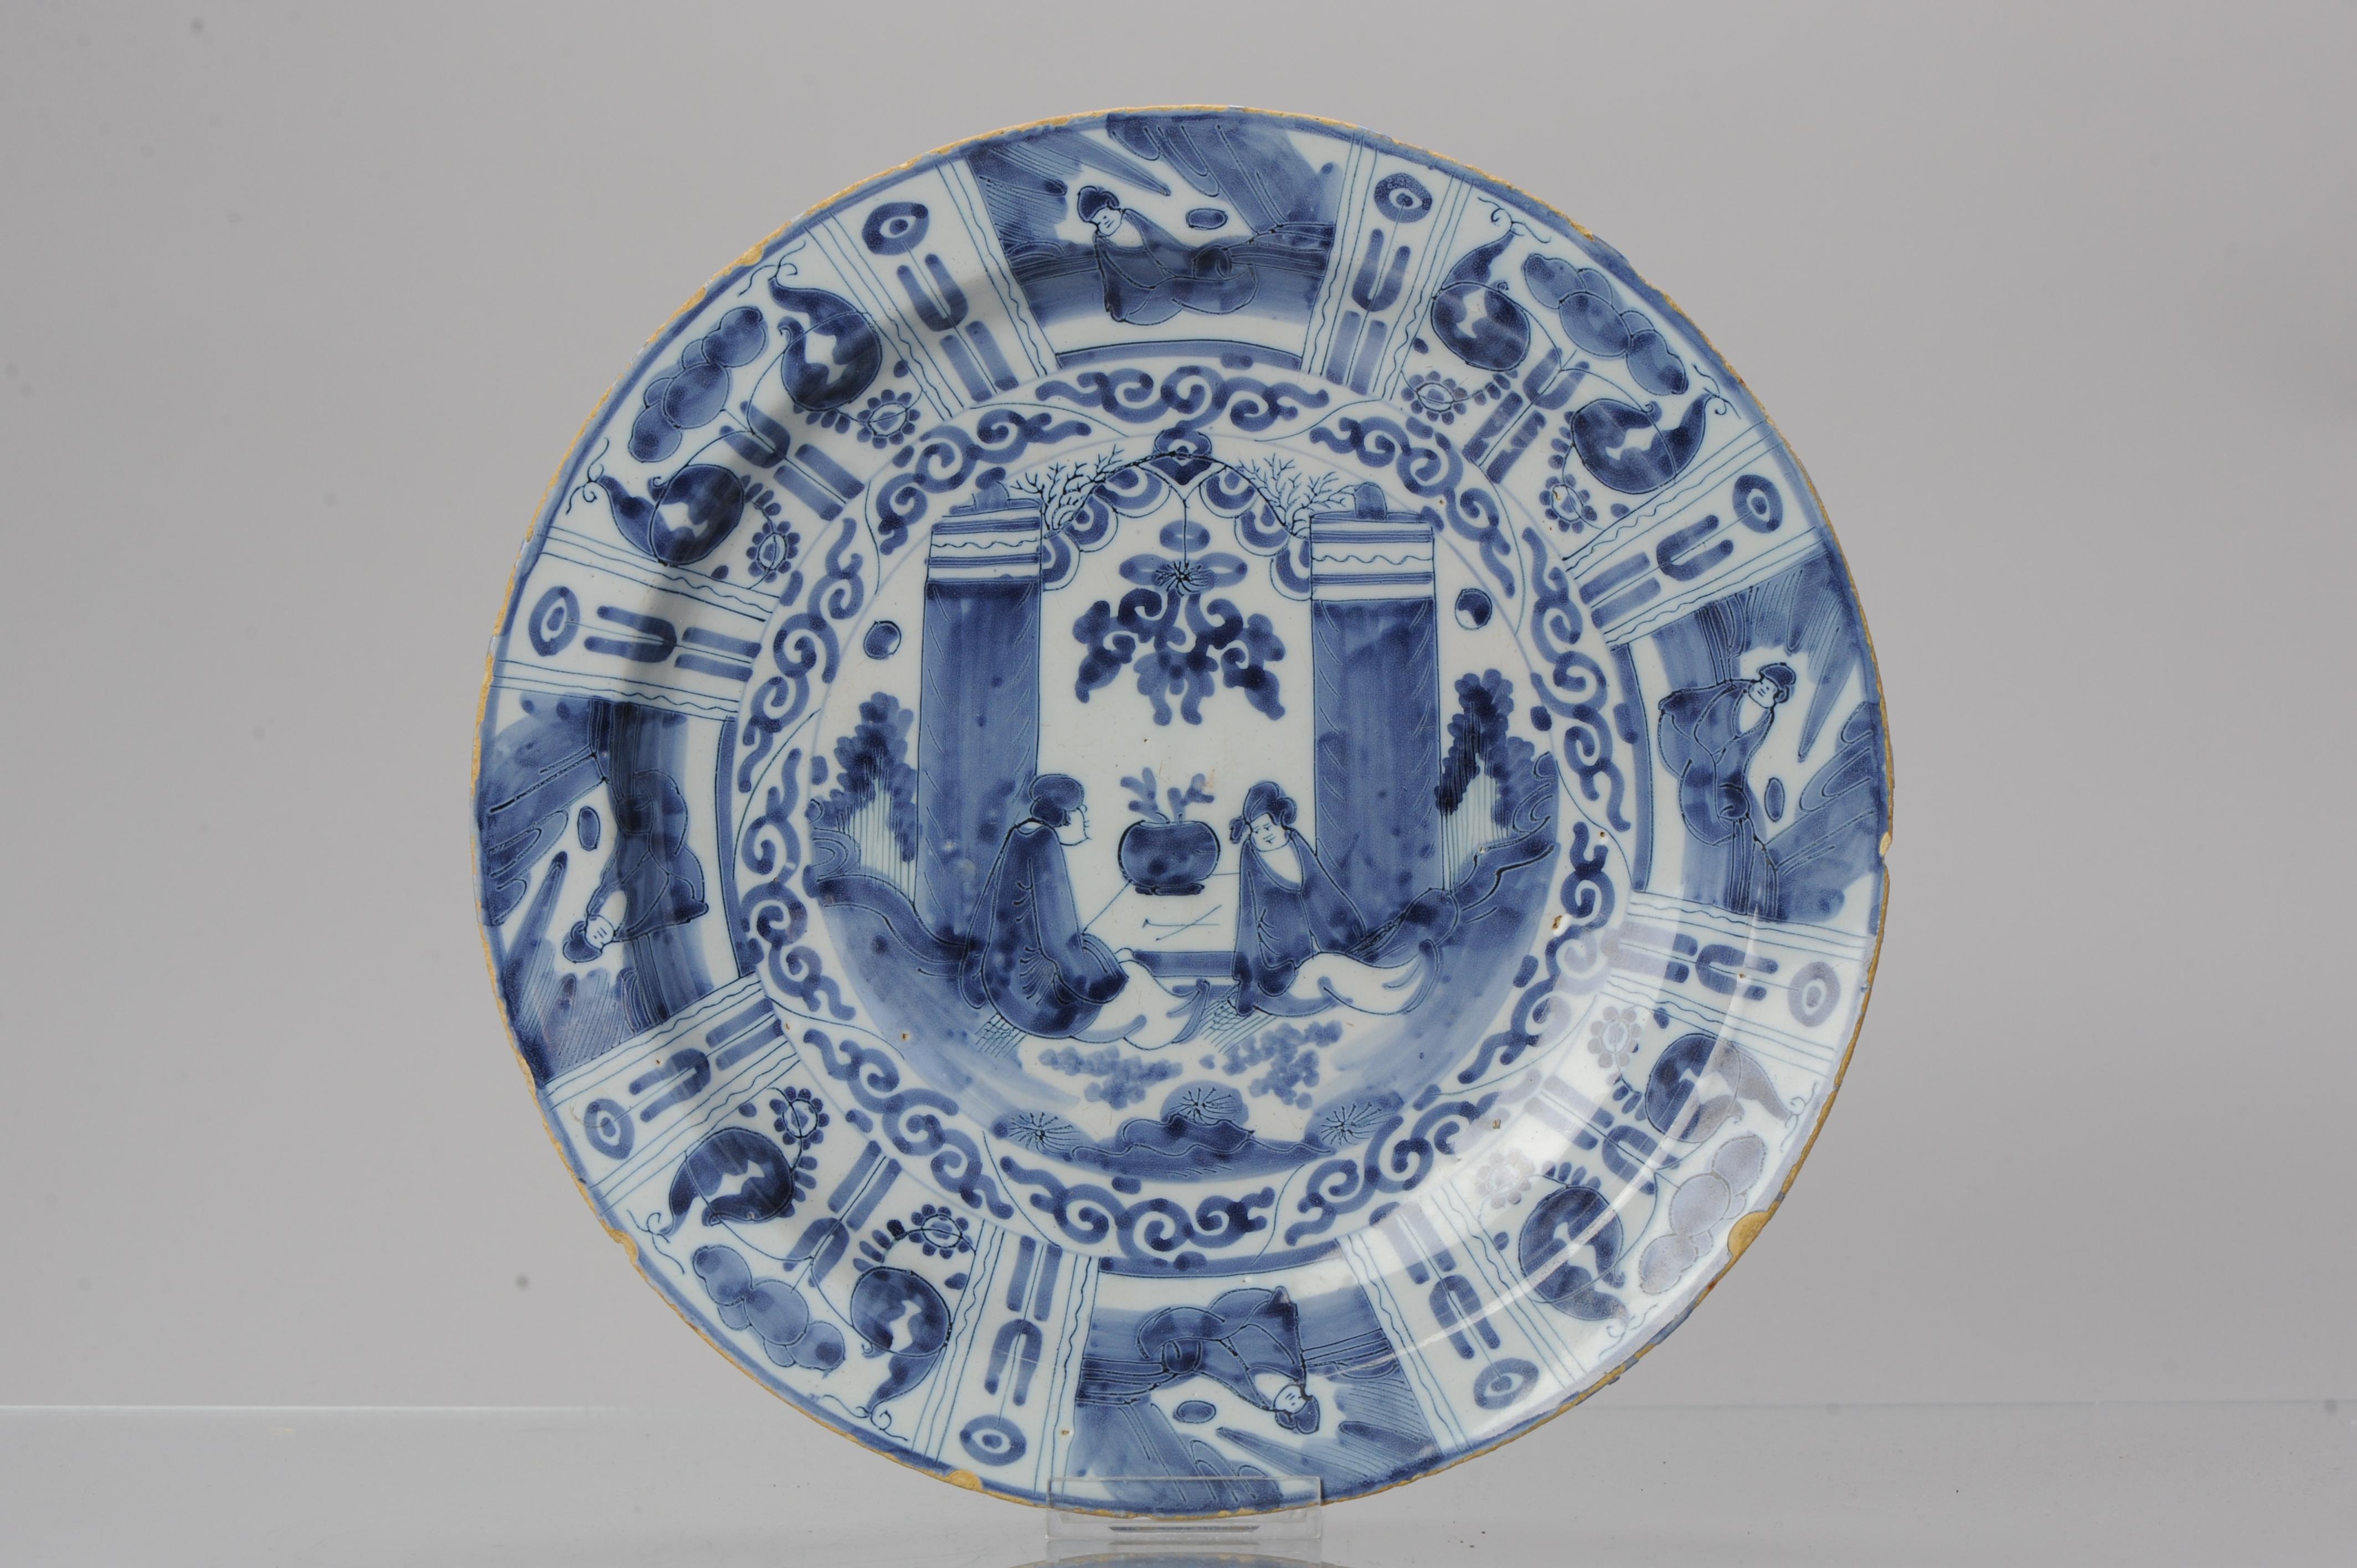 Description

Very cool 17/18C Delft Porcelain charger with hand painted decoration.

Inspired on Chinese pieces from the mid 17th century. Very interesting scene of man and lady in a pagoda.

Condition
Typical fritting and small chips. Size